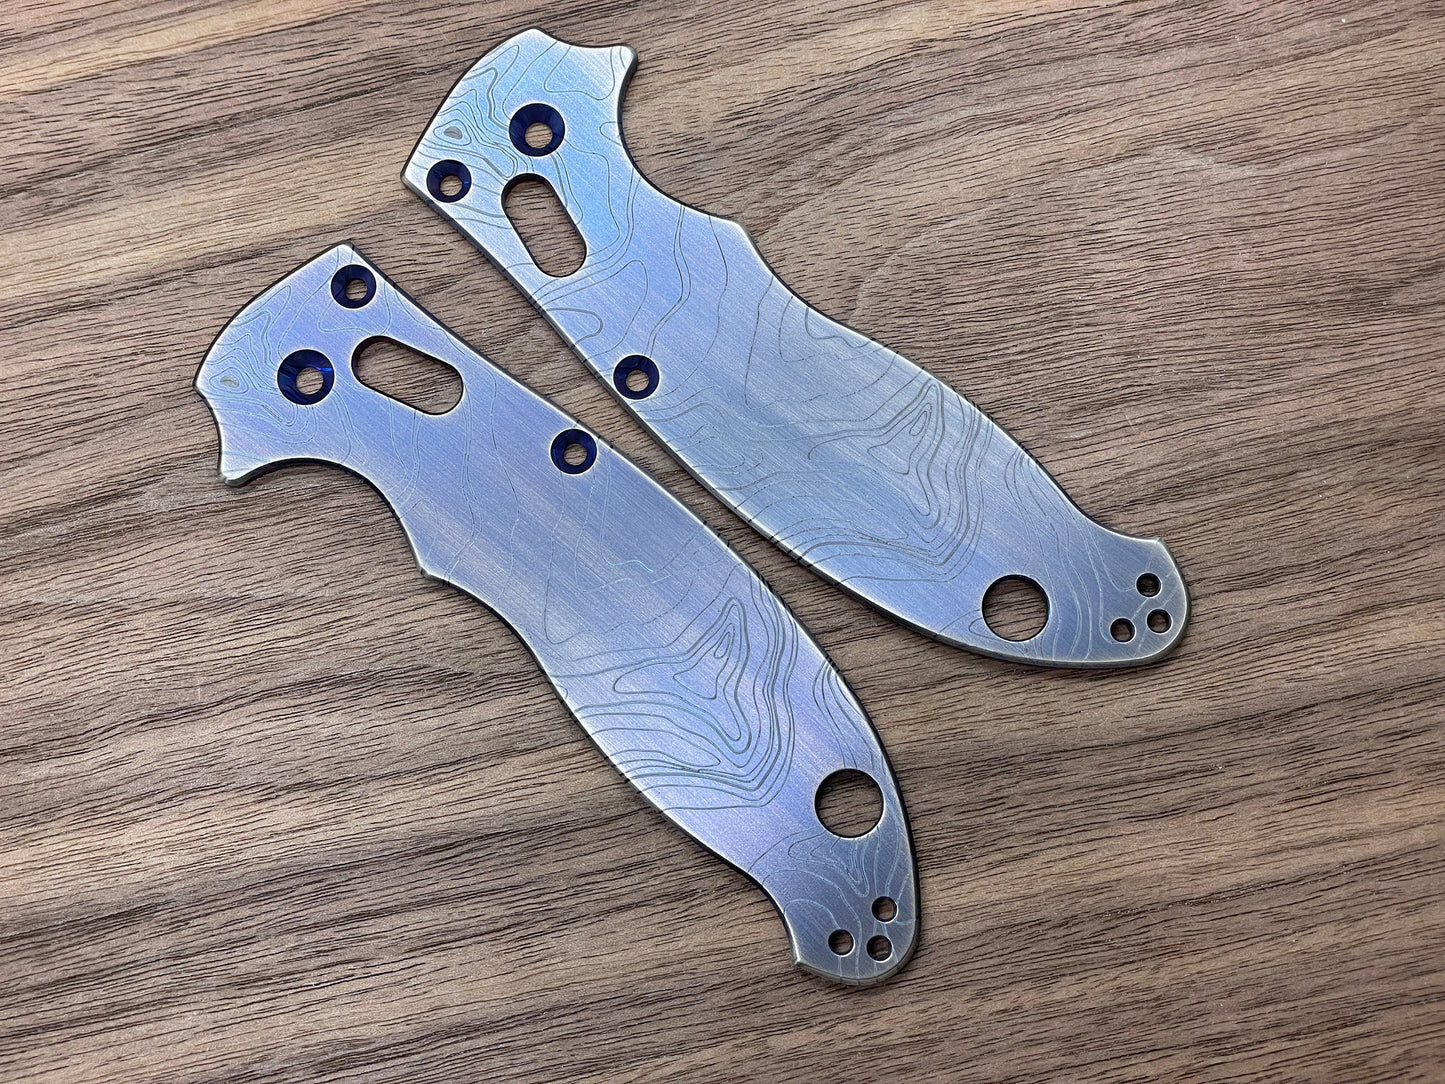 TOPO engraved Blue Ano Brushed Titanium scales for Spyderco MANIX 2